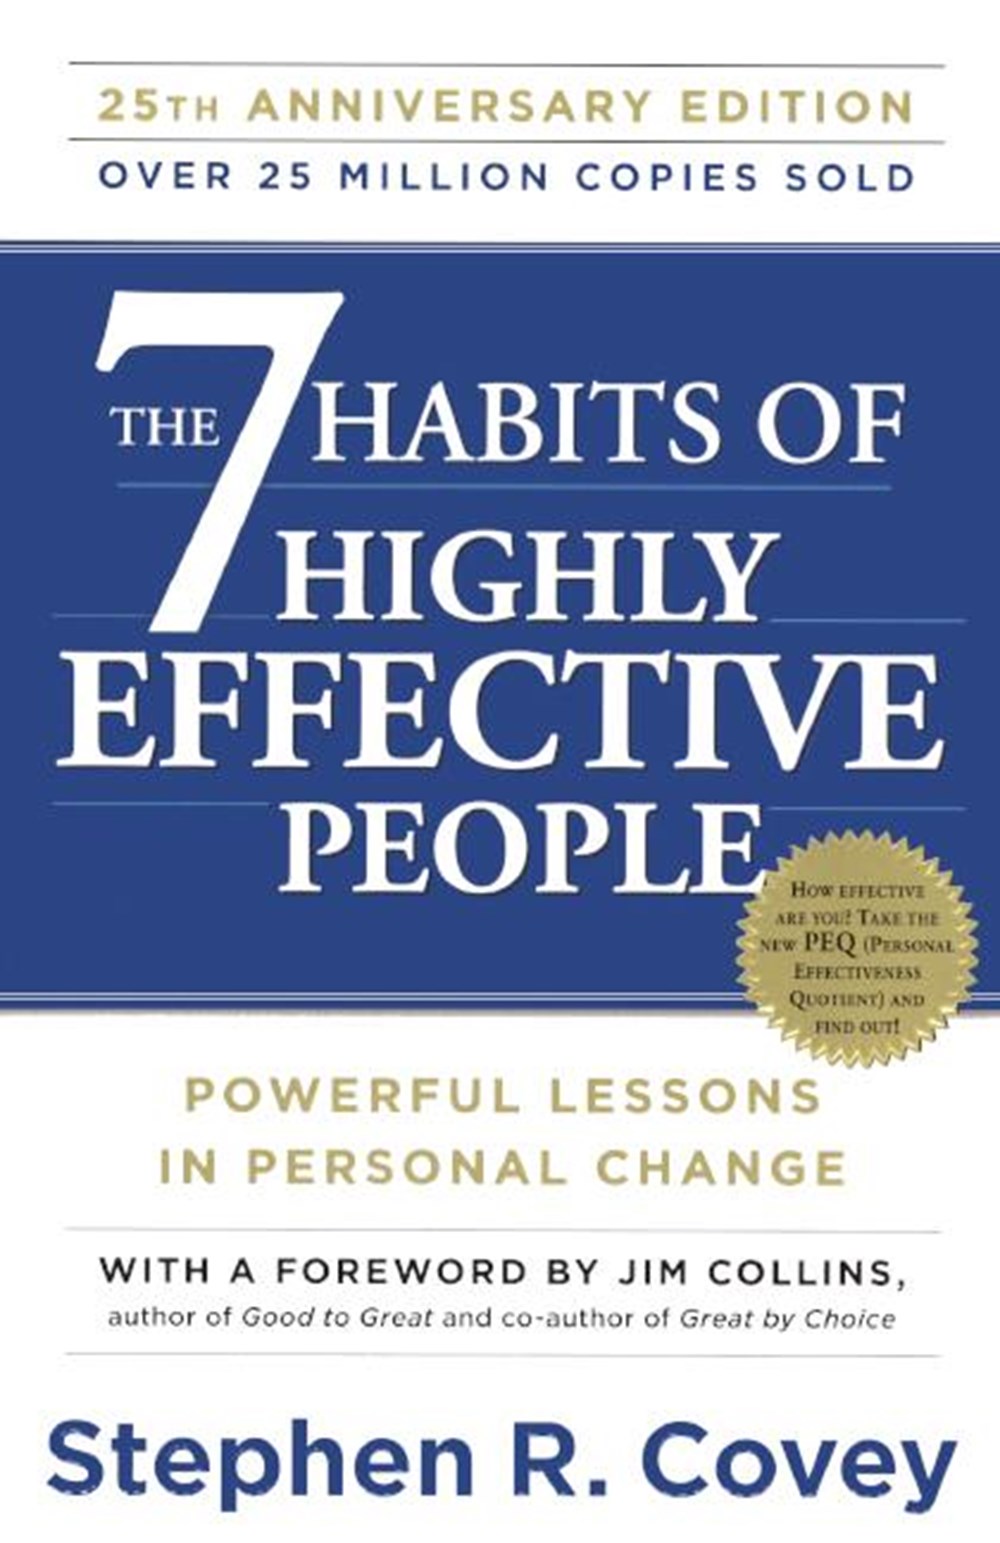 7 Habits of Highly Effective People: 25th Anniversary Edition (Anniversary, Turtleback School & Libr